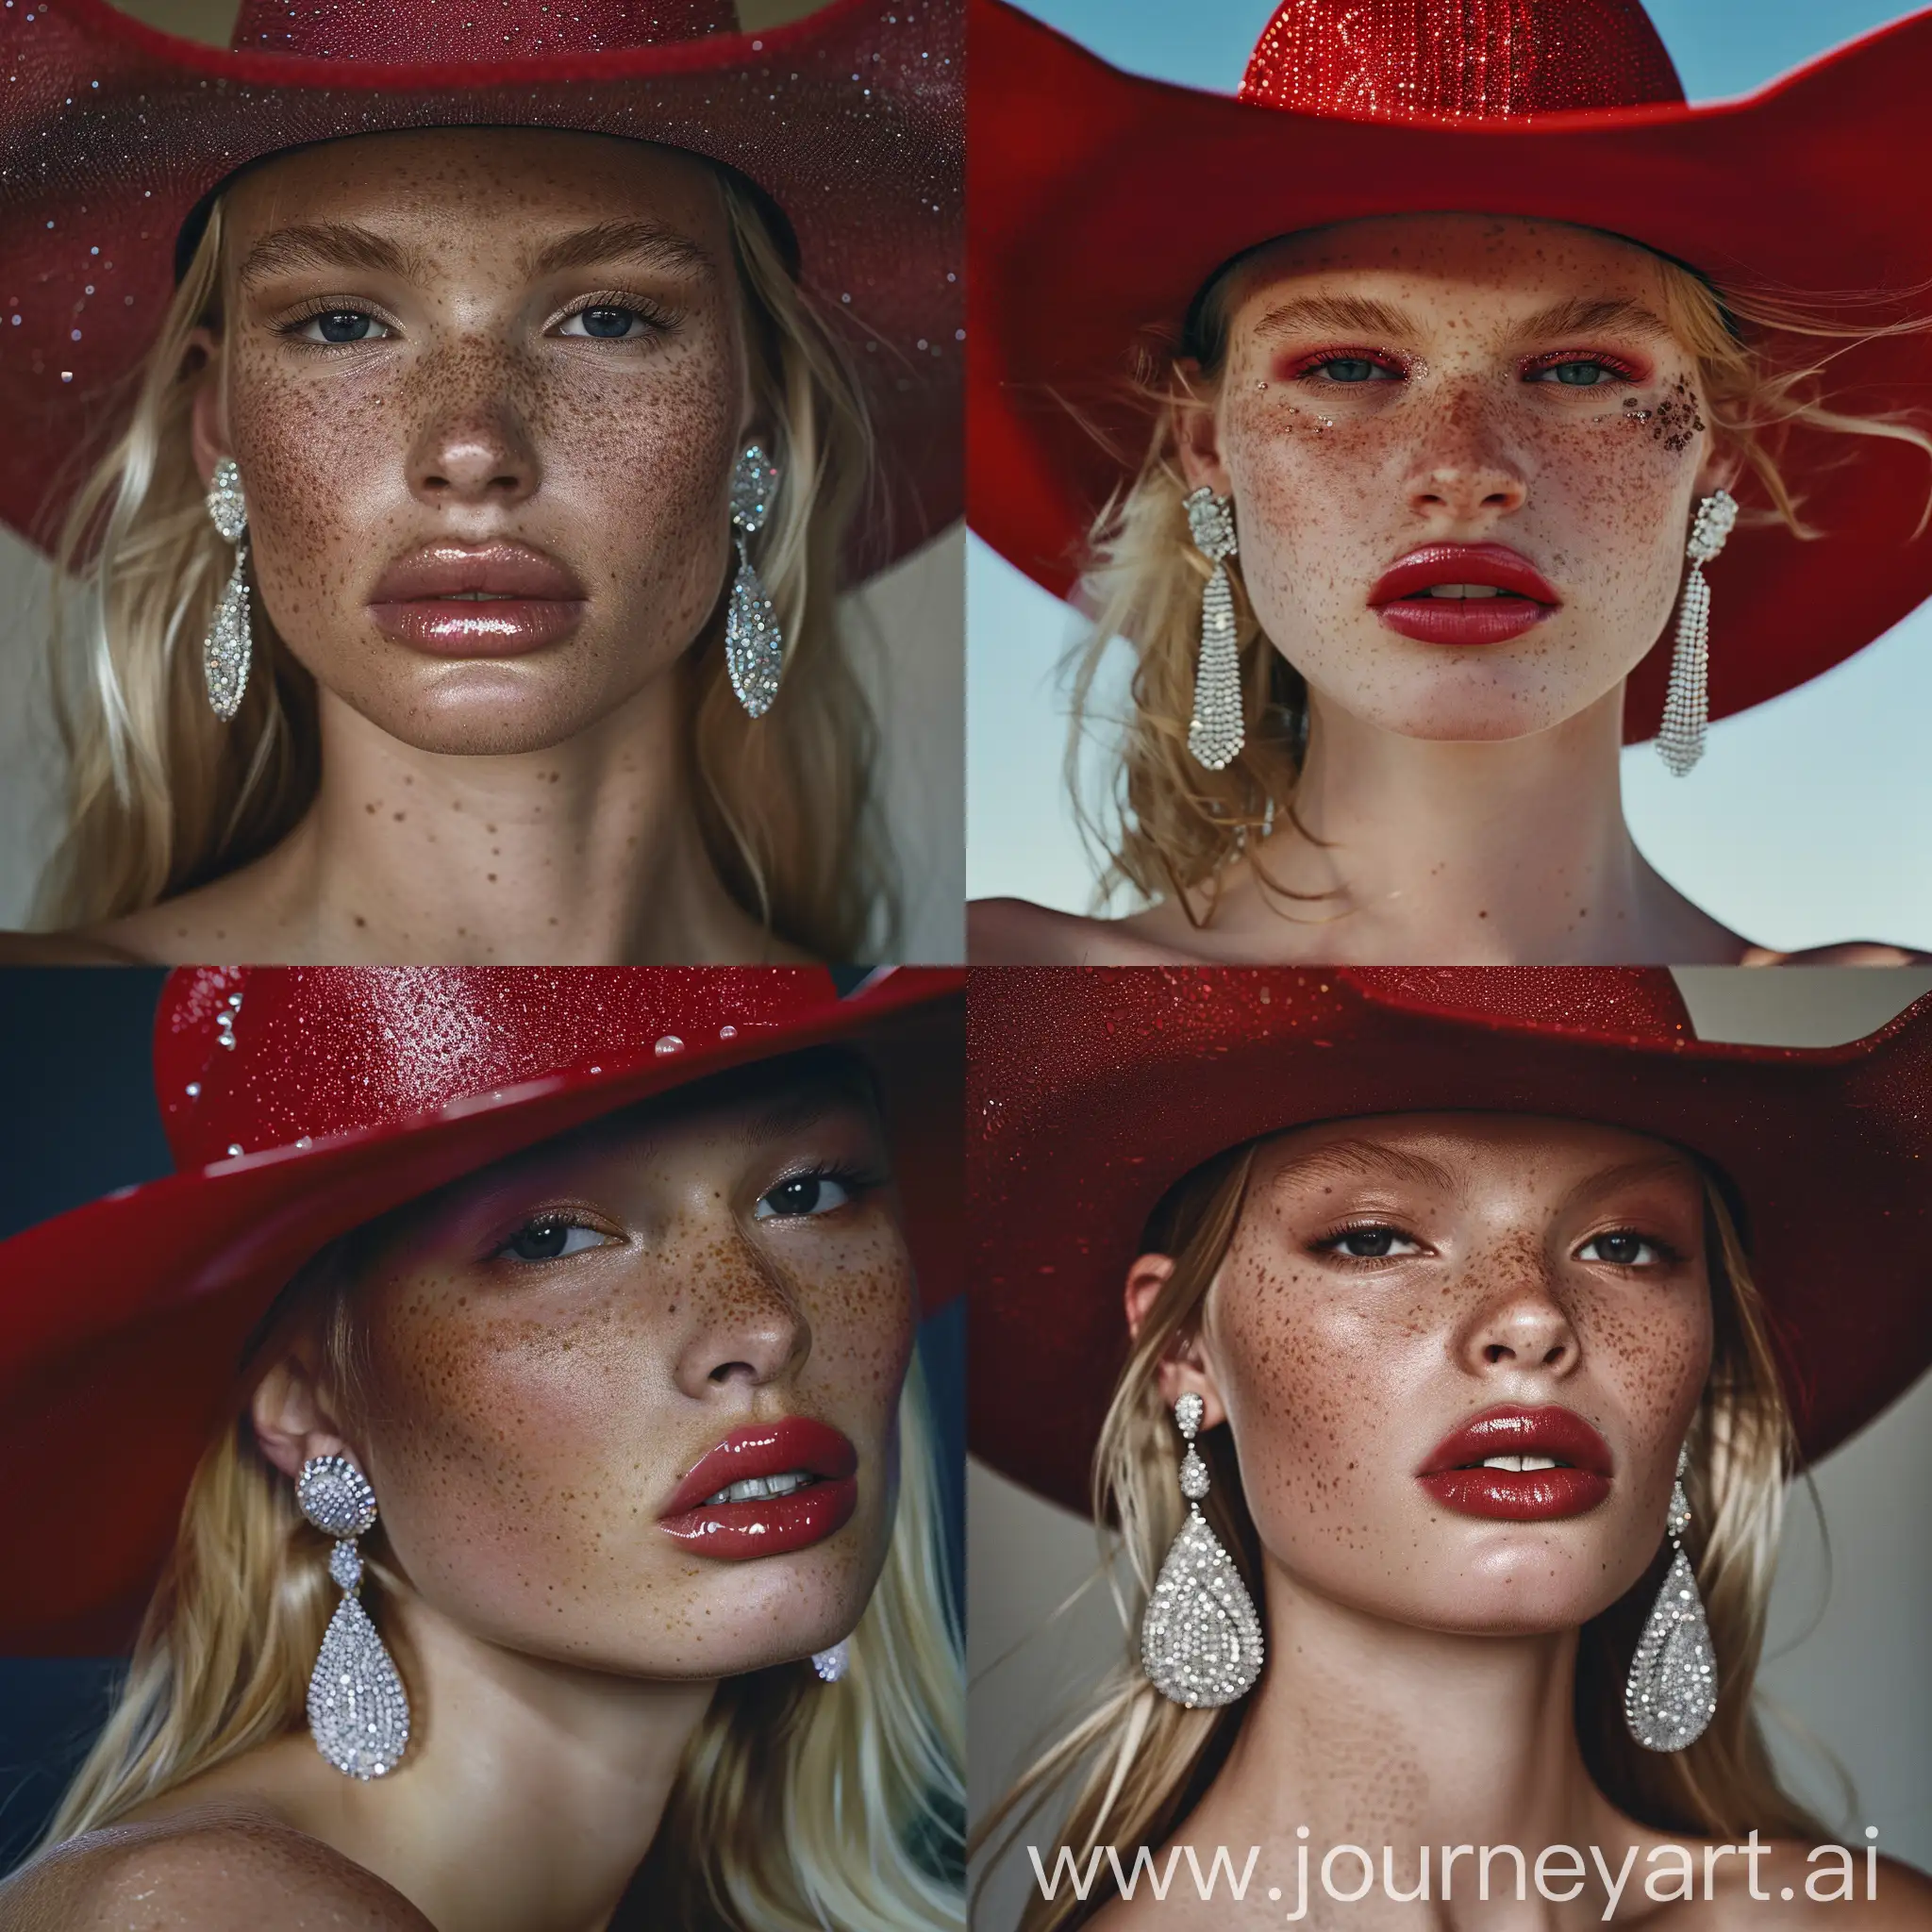 Blonde-Japanese-Model-in-90s-Aesthetic-Red-Cowboy-Hat-and-Diamond-Earrings